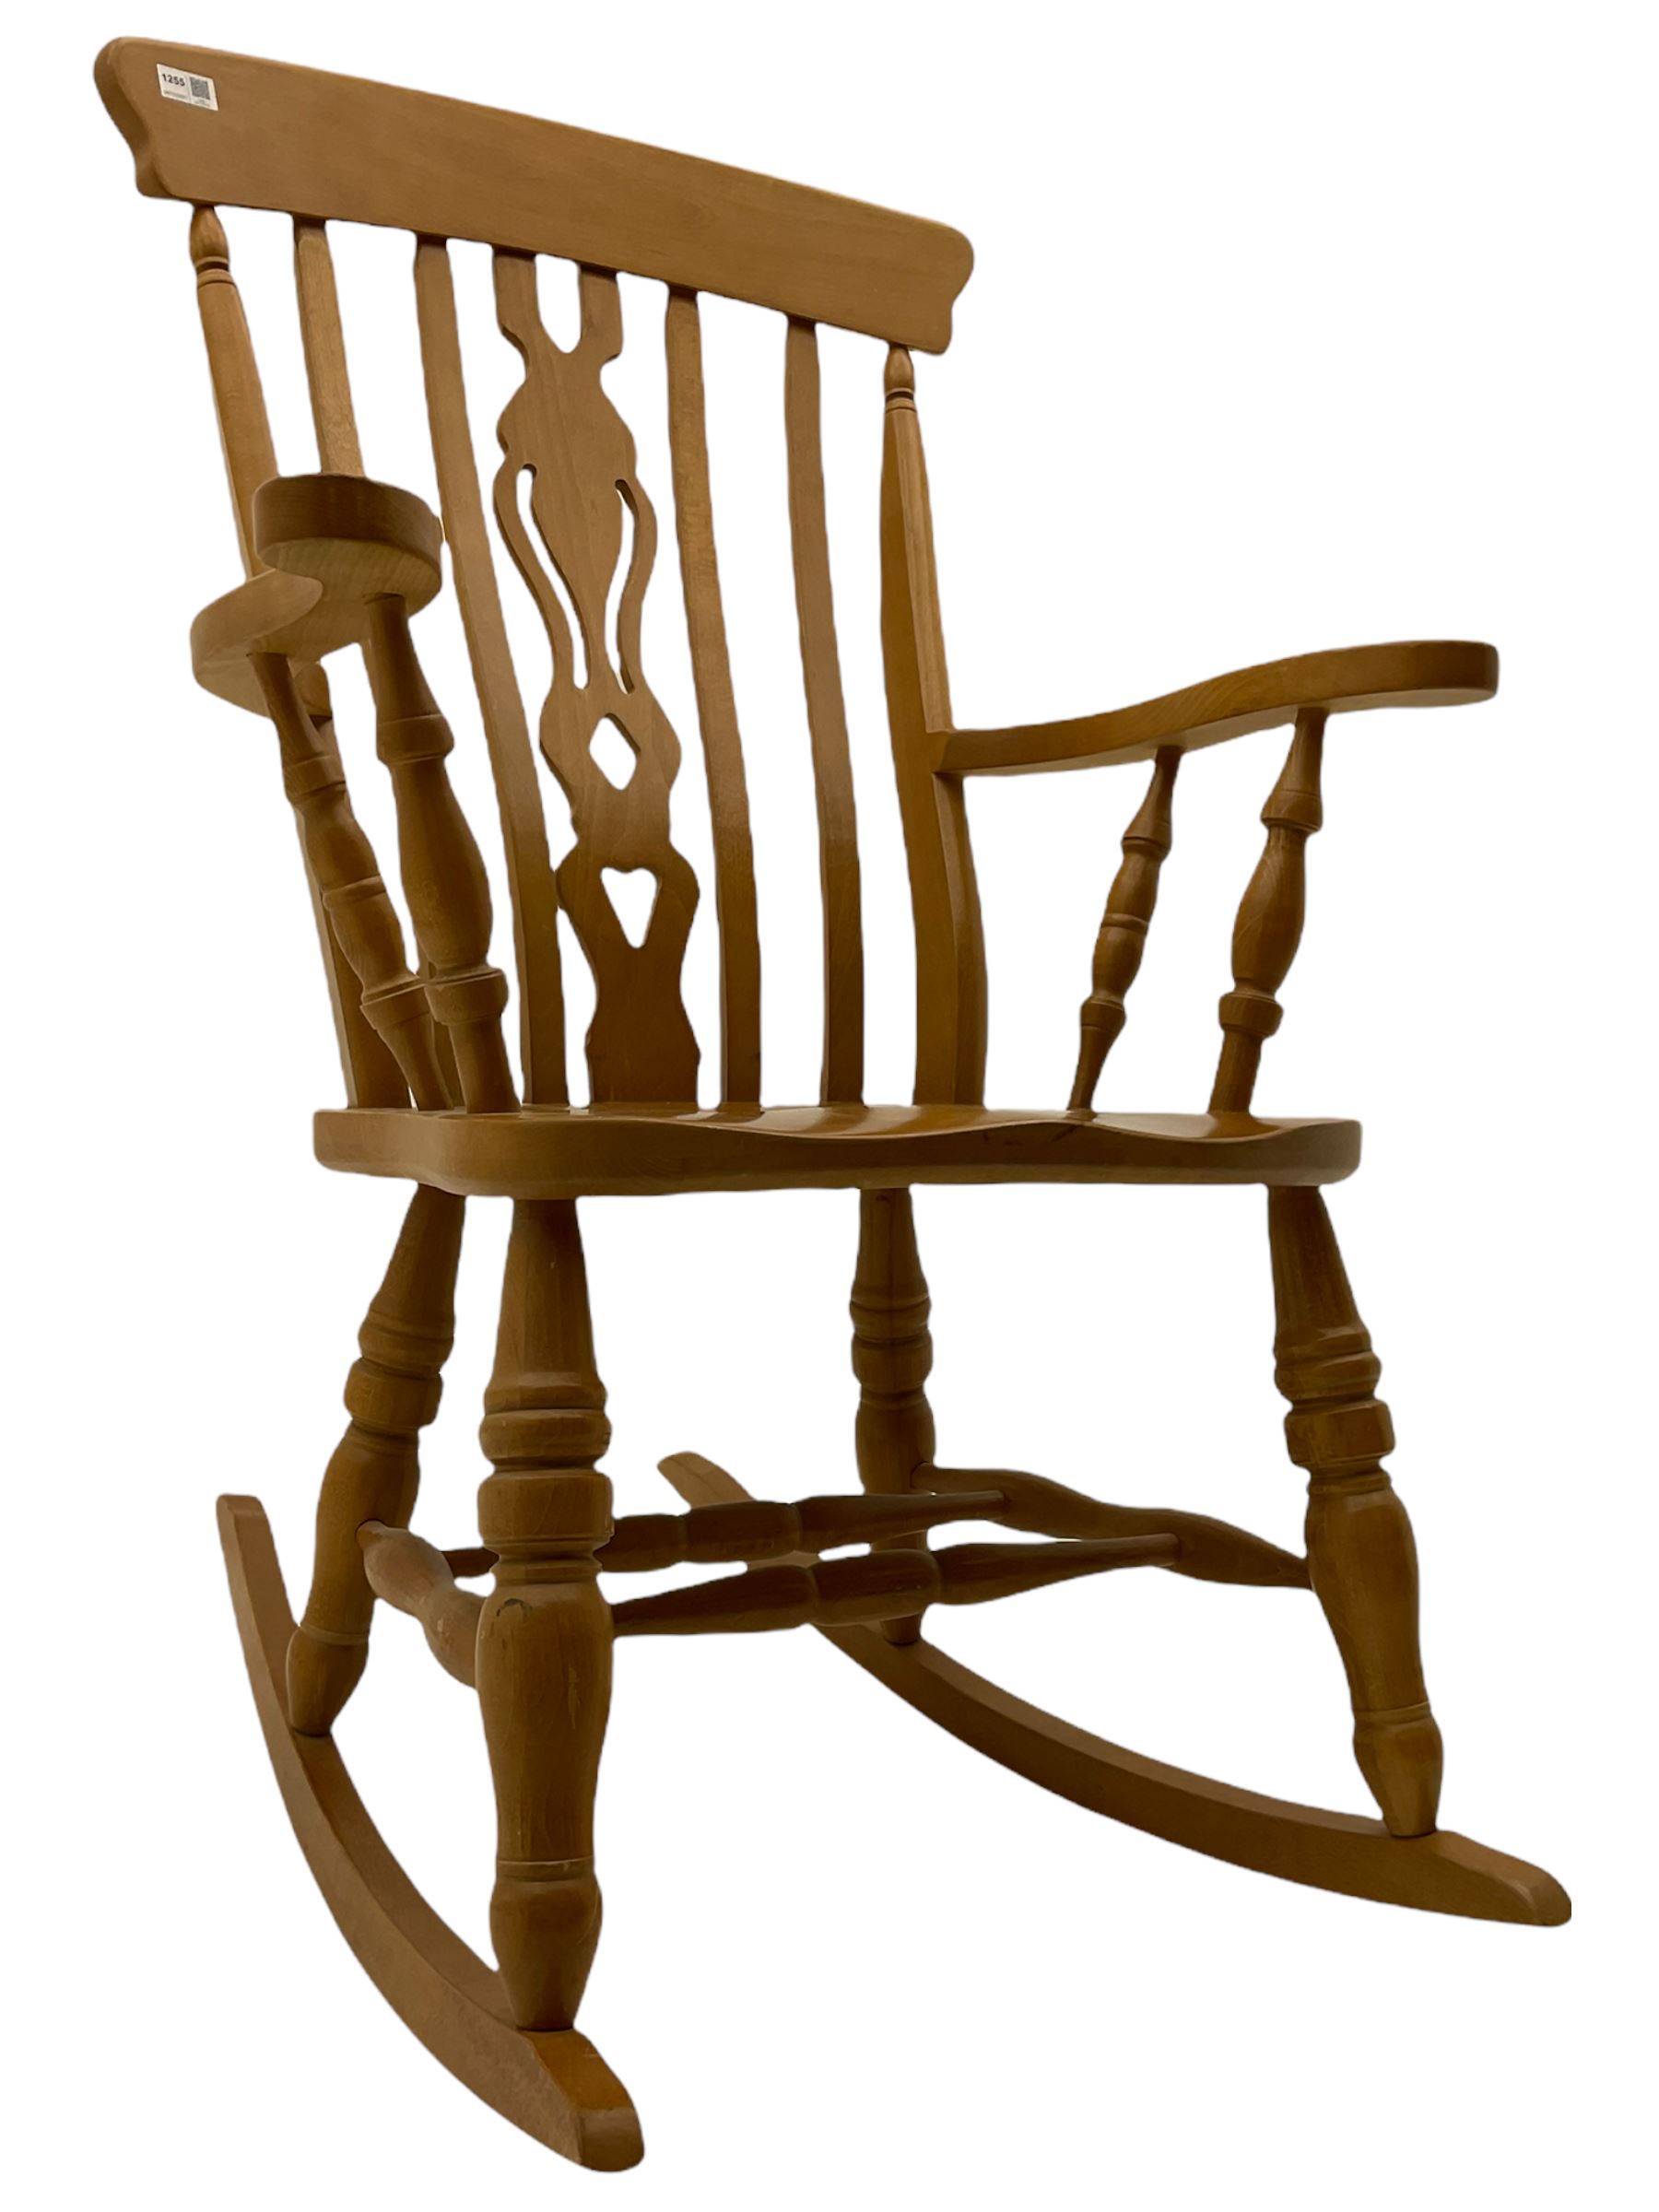 Solid beech farmhouse rocking chair - Image 6 of 6